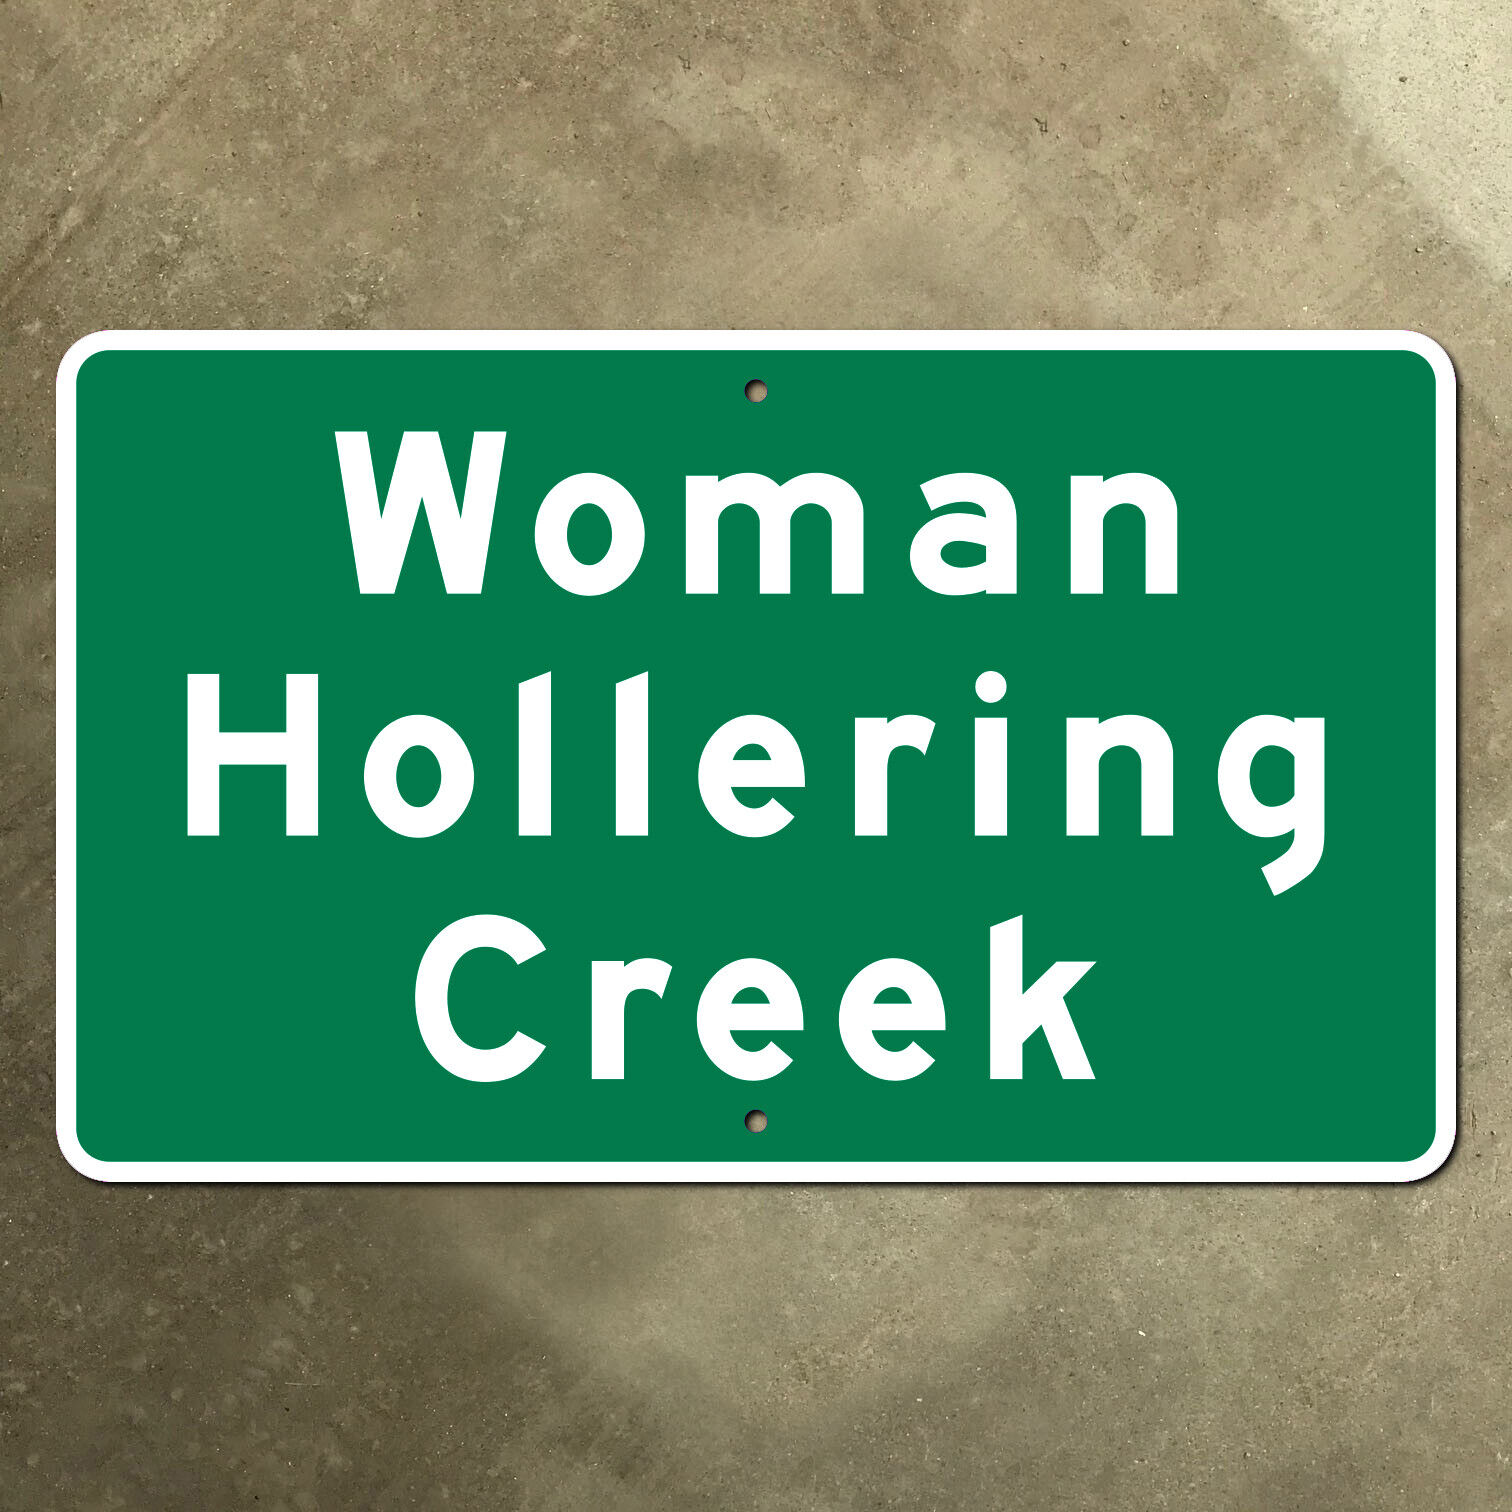 Woman Hollering Creek Texas highway marker guide road sign 1990s I-10 23x14